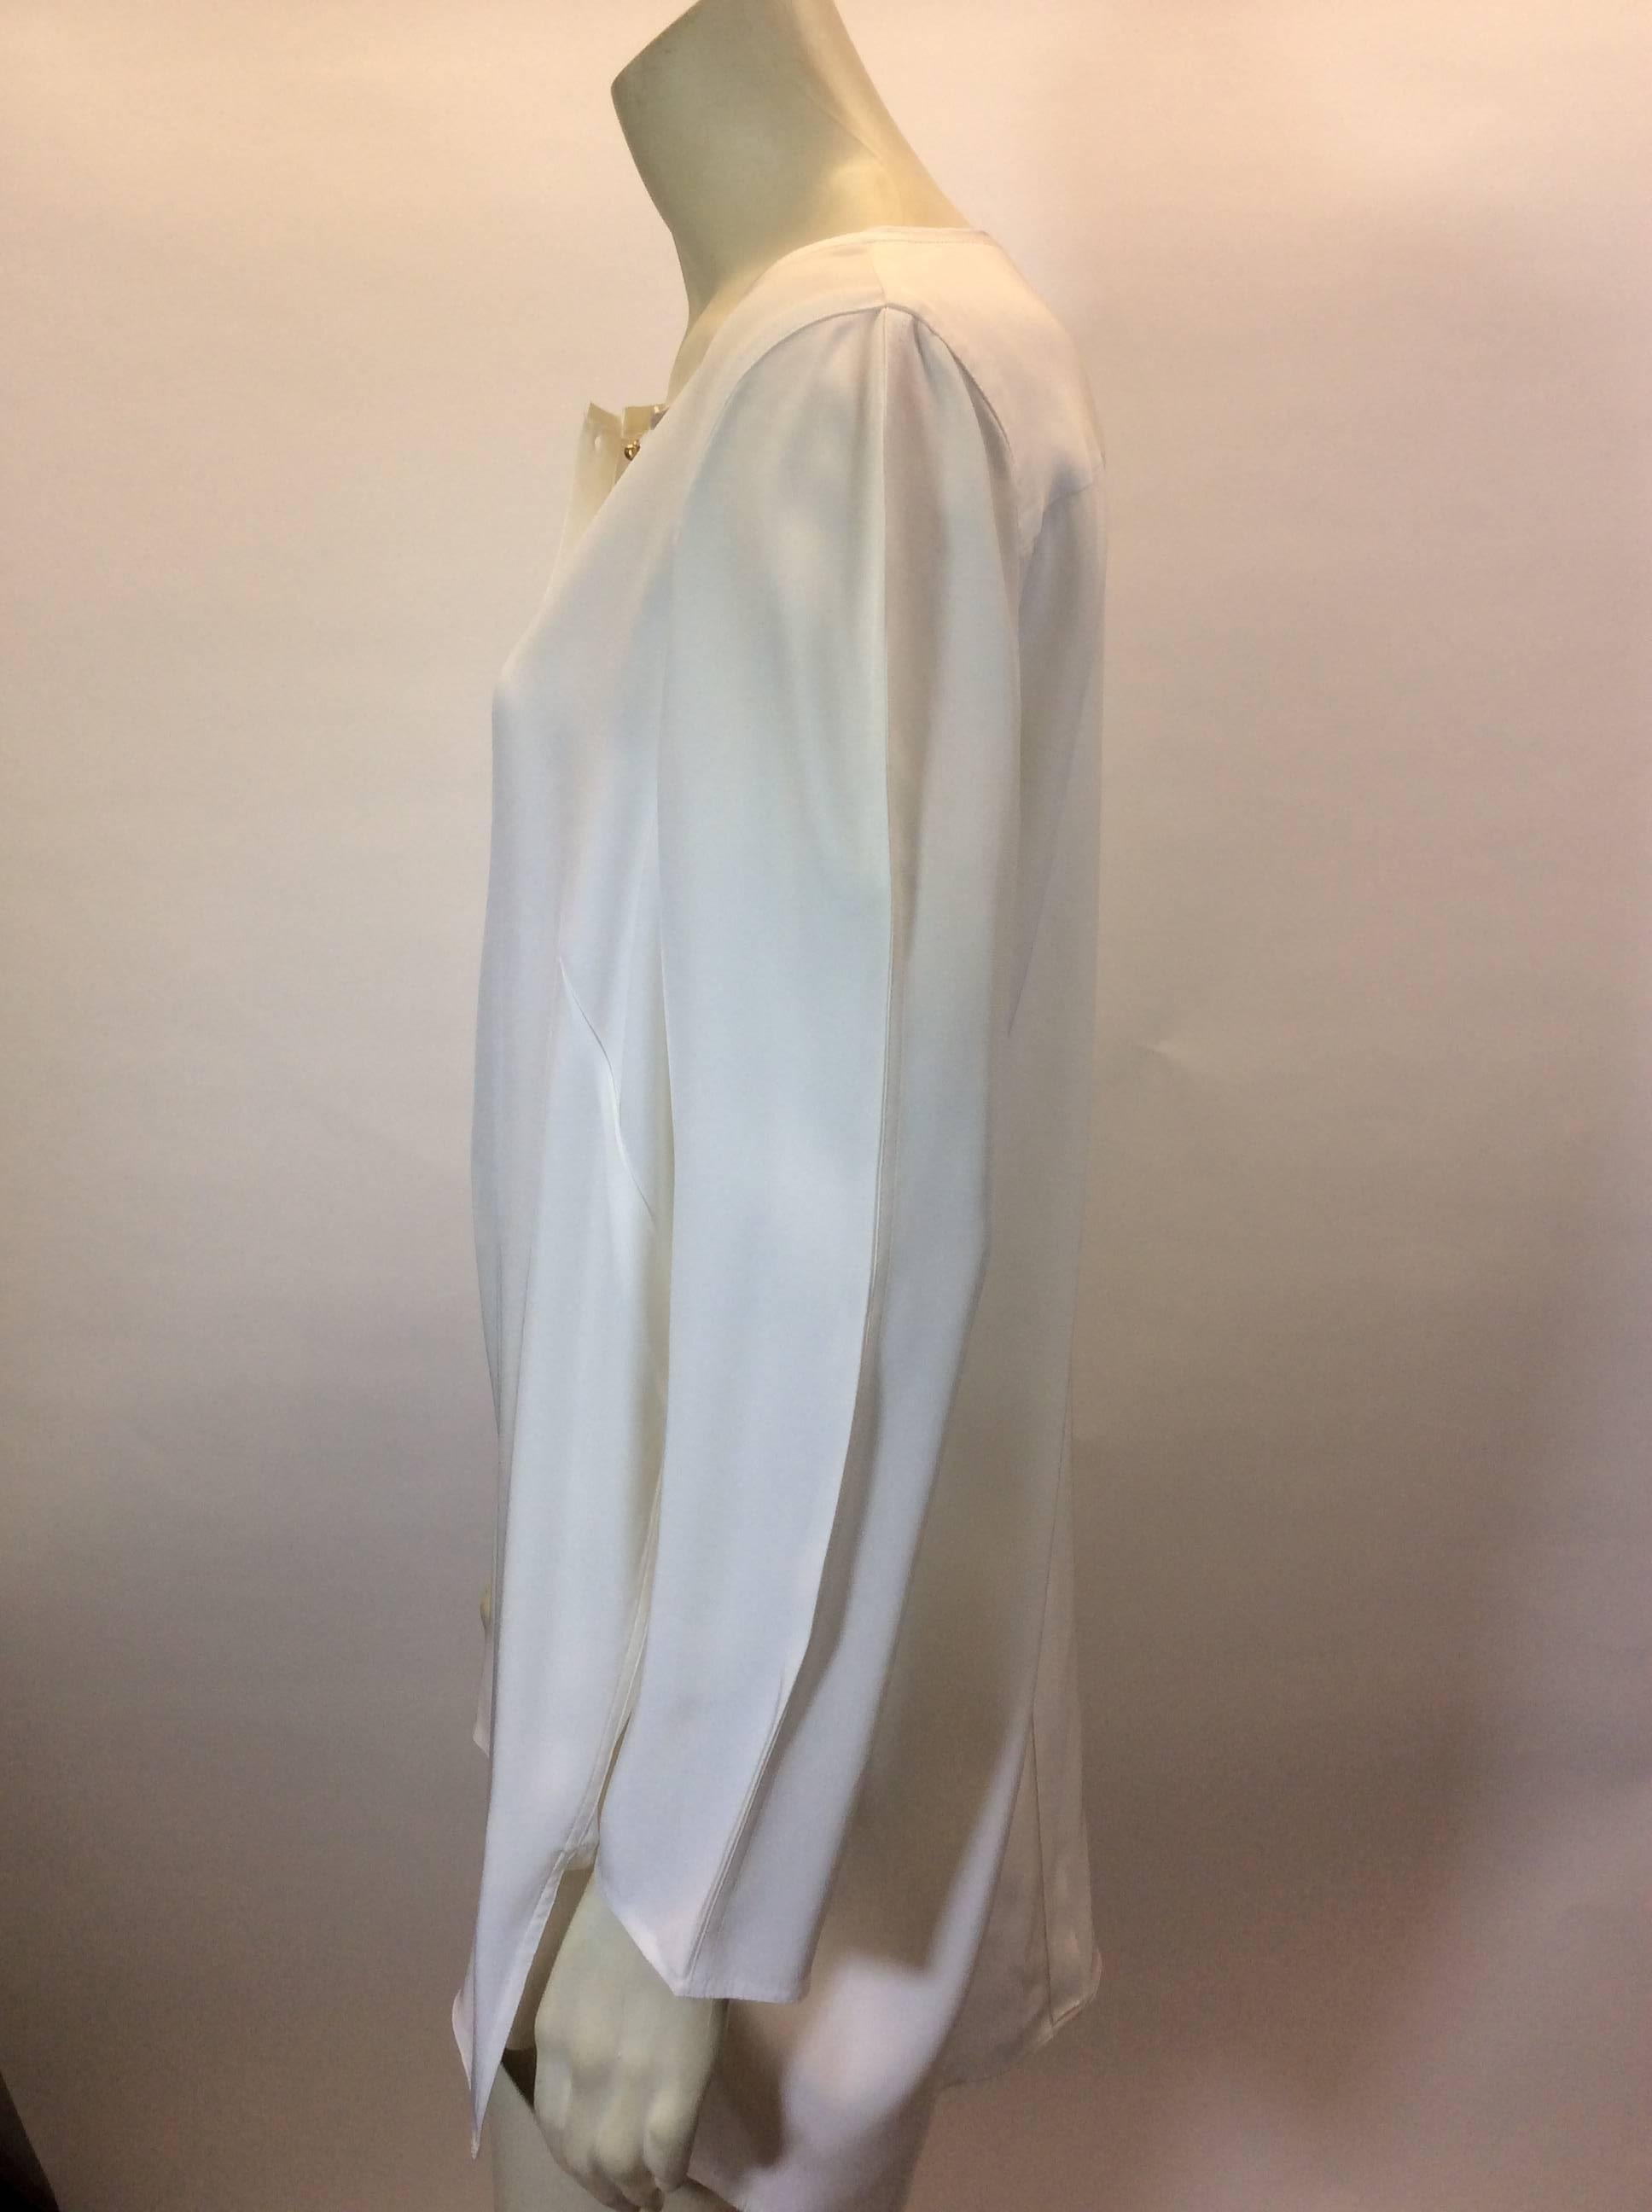 White Silk Blouse with Button Detail
4 button front placket
Stitching detail along sleeves
Trimmed neckline
Pleated back detail
Size Medium
100% Silk